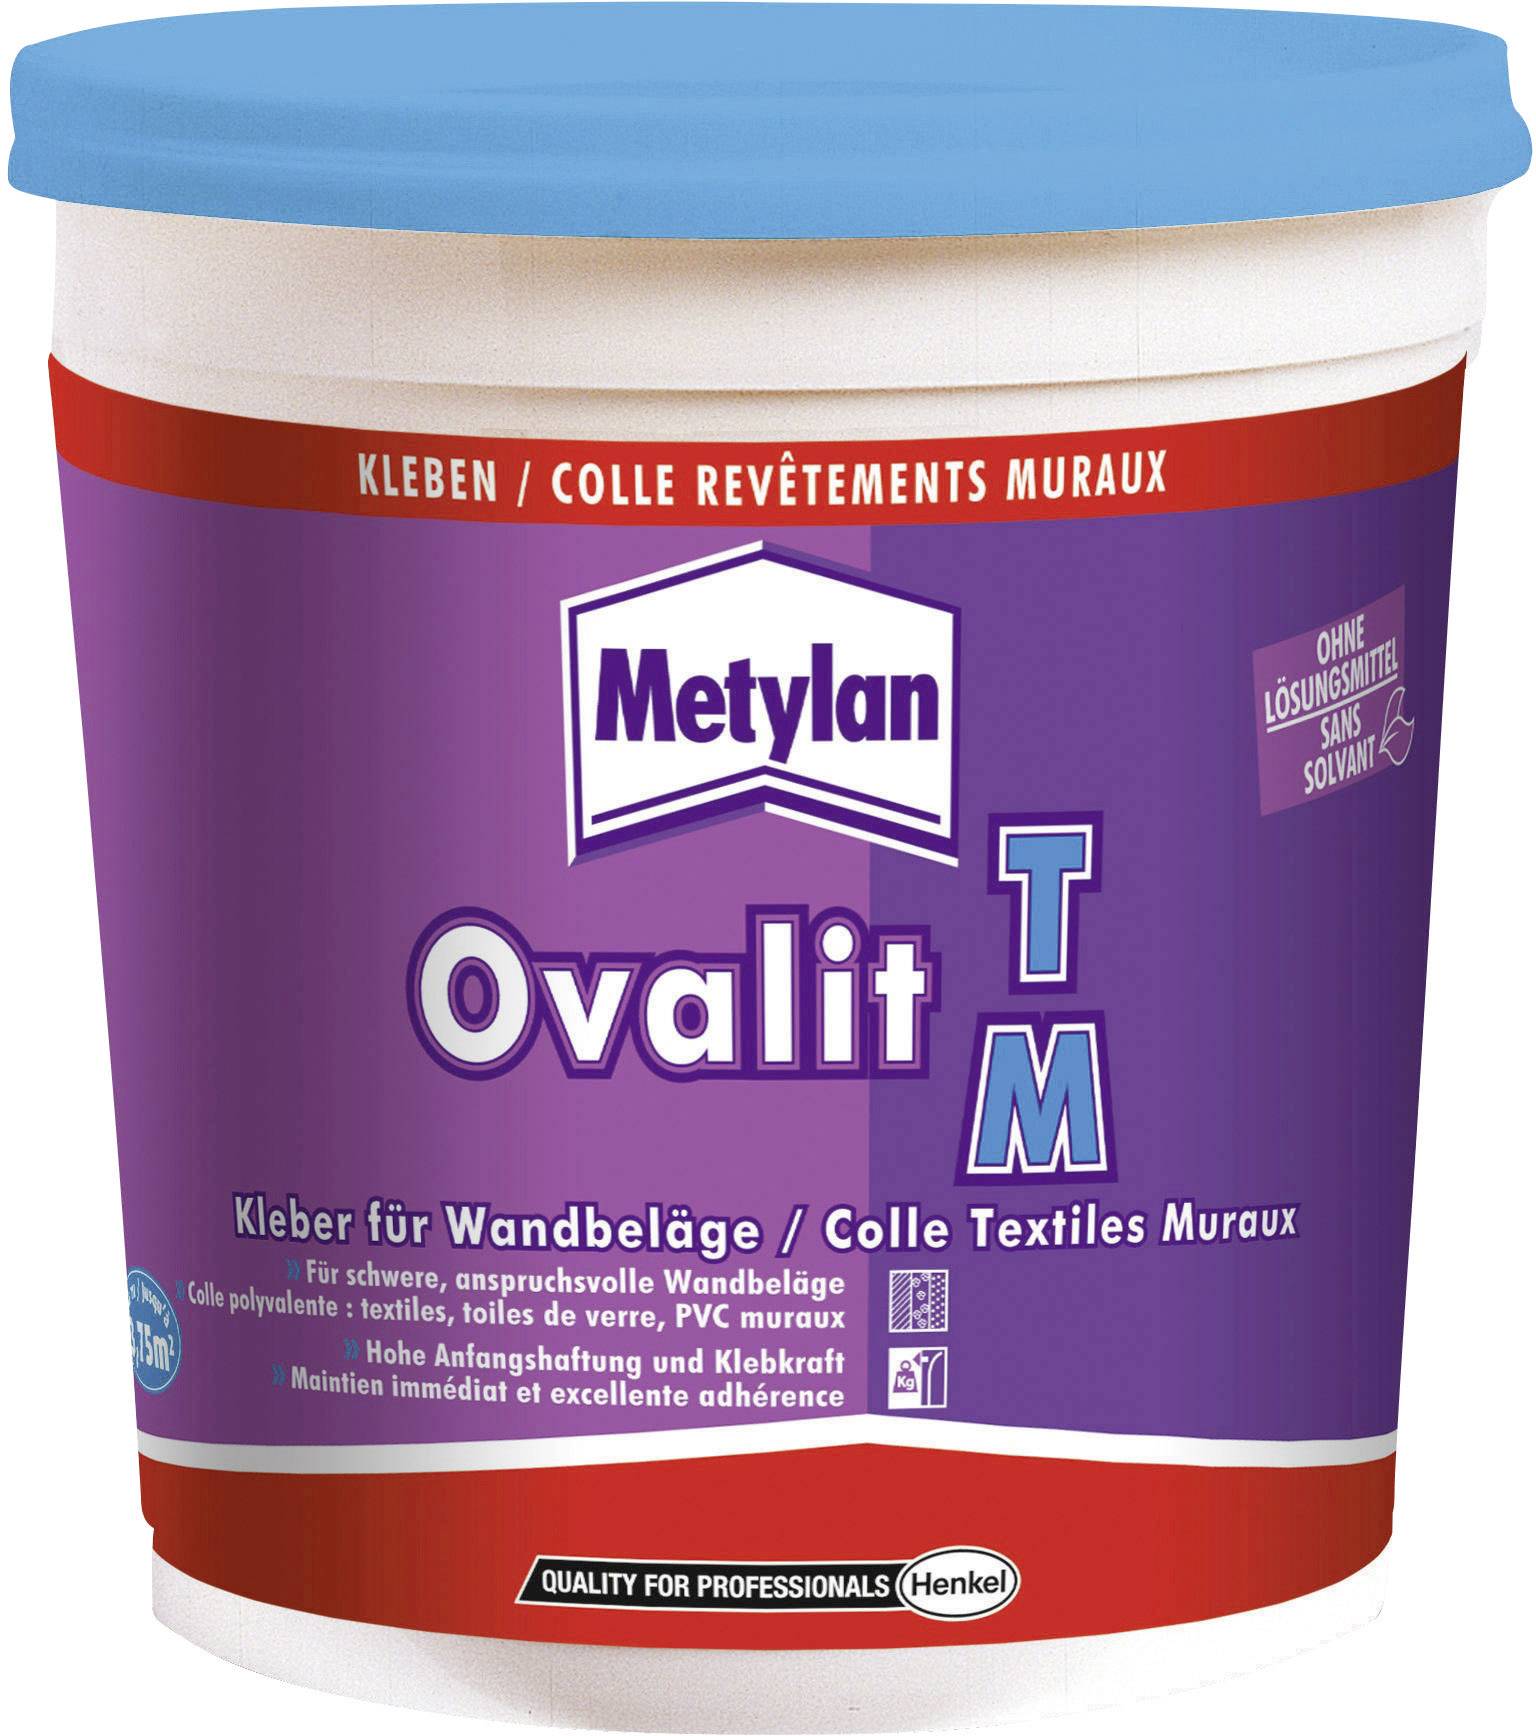 T | g OVT12 Wall Electronic Buy Conrad Ovalit adhesive covering Metylan 750 M